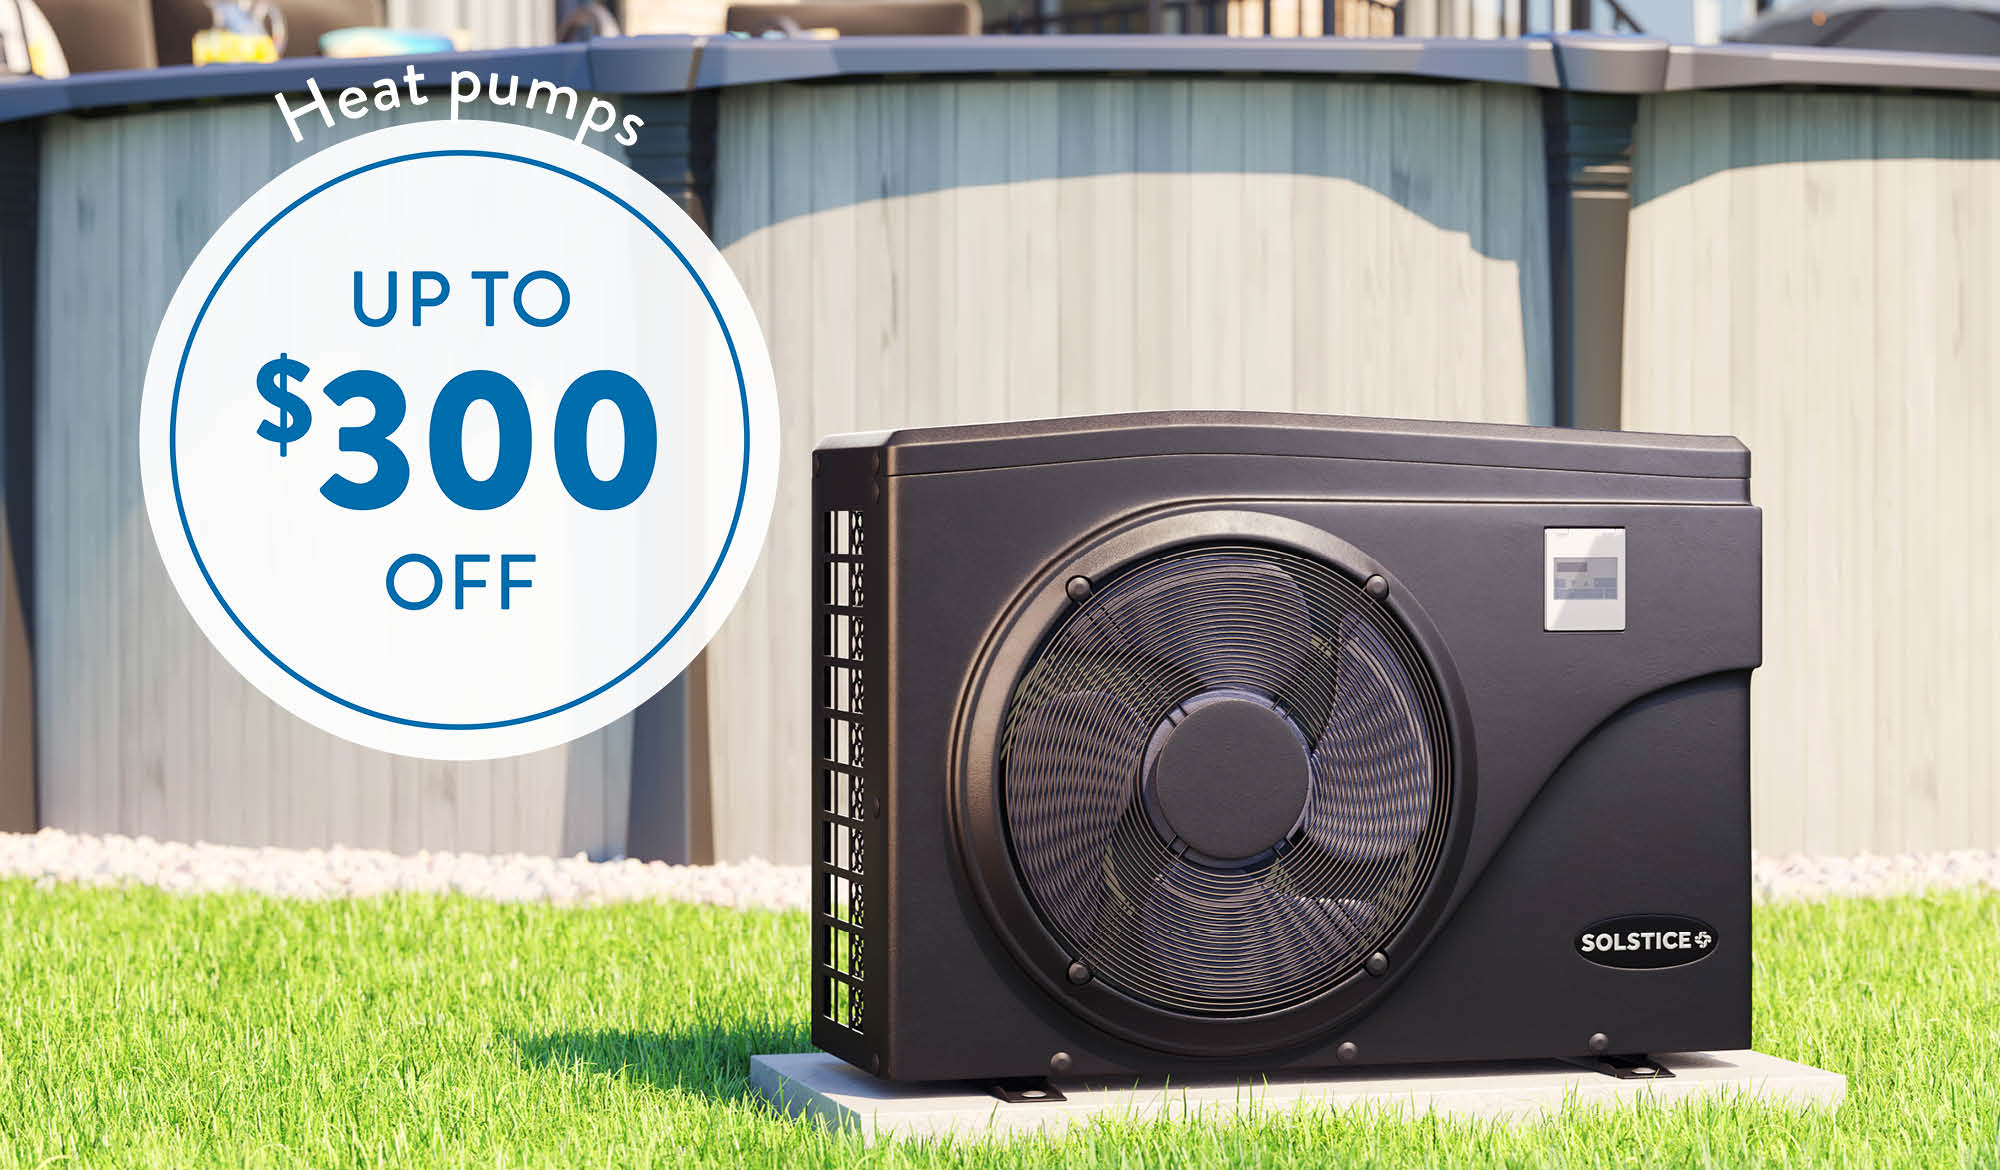 Up to $300 off heat pumps